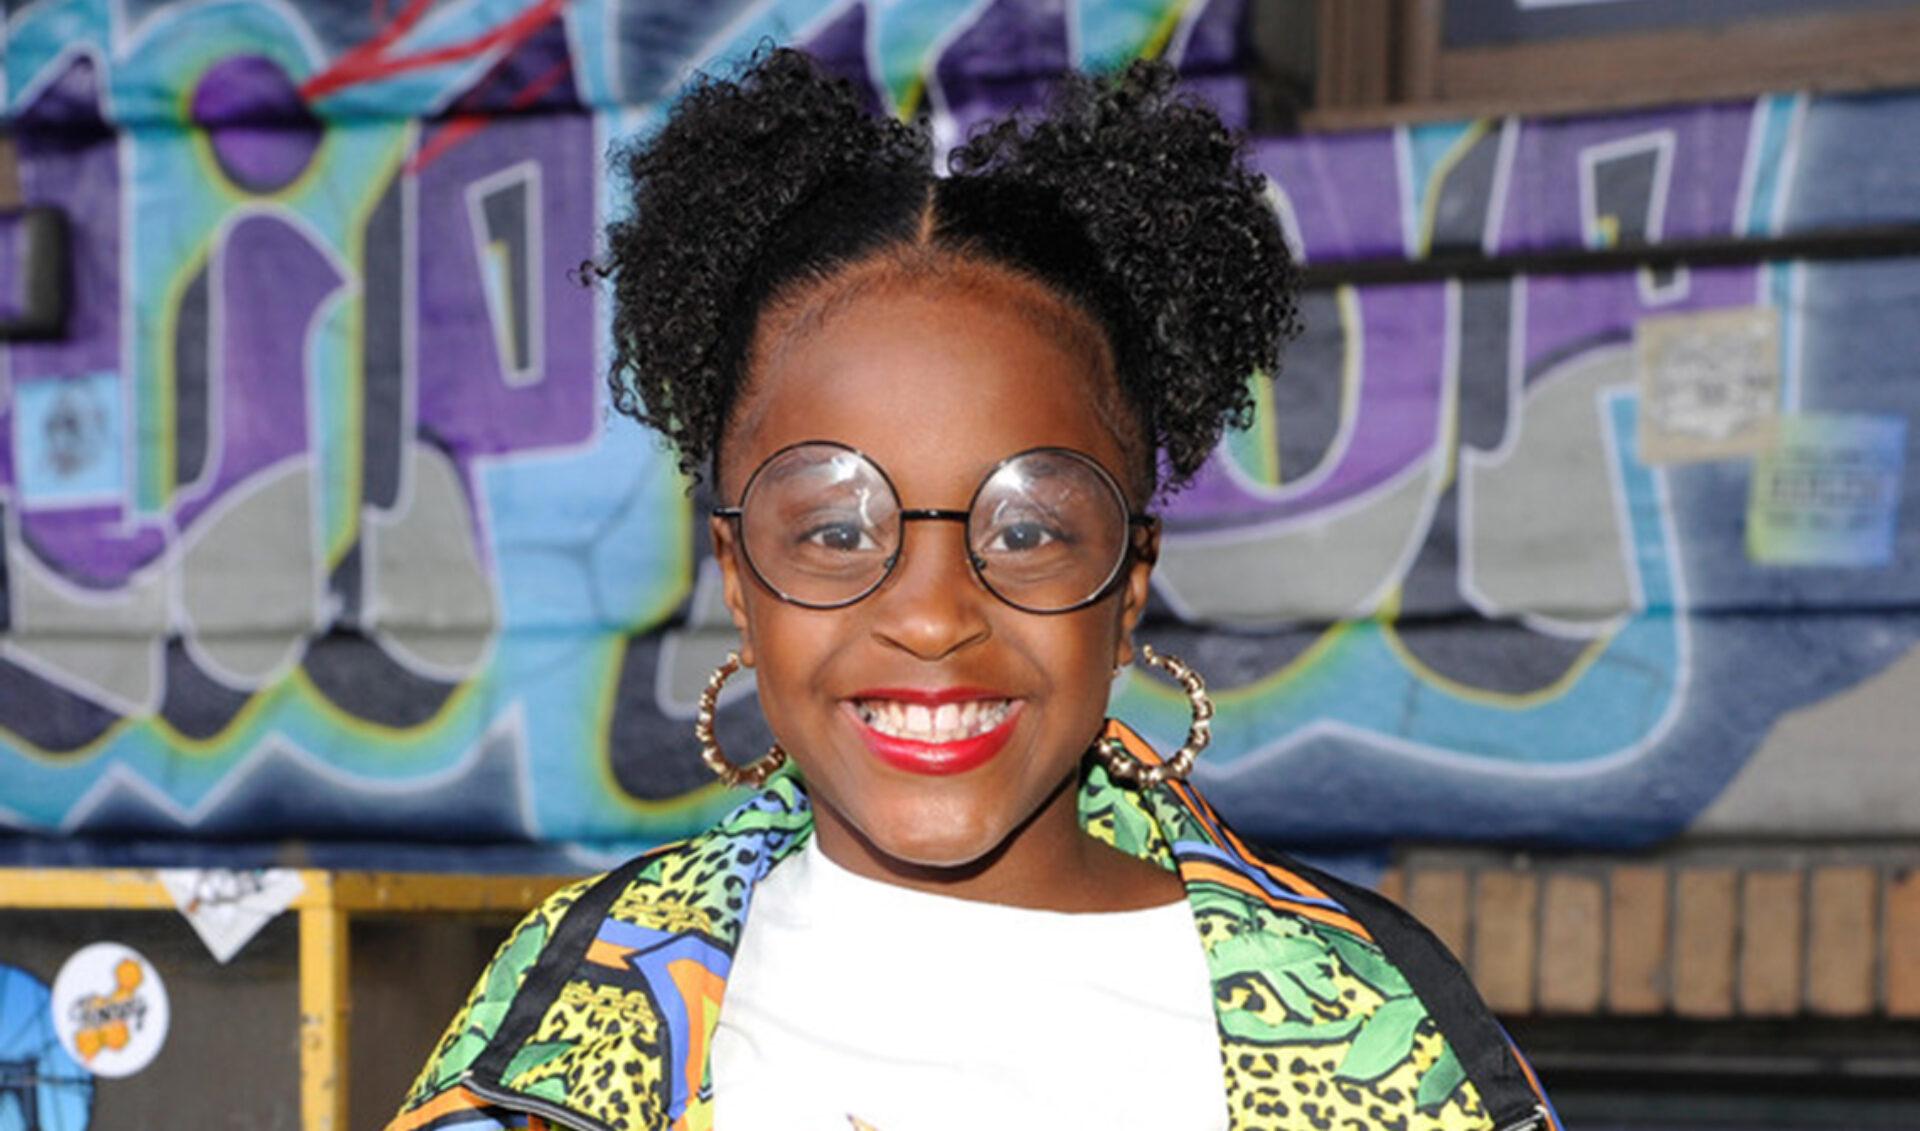 UTA Signs 11-Year-Old Comedian Cece Price, Who Got Her Start On Vine (Exclusive)